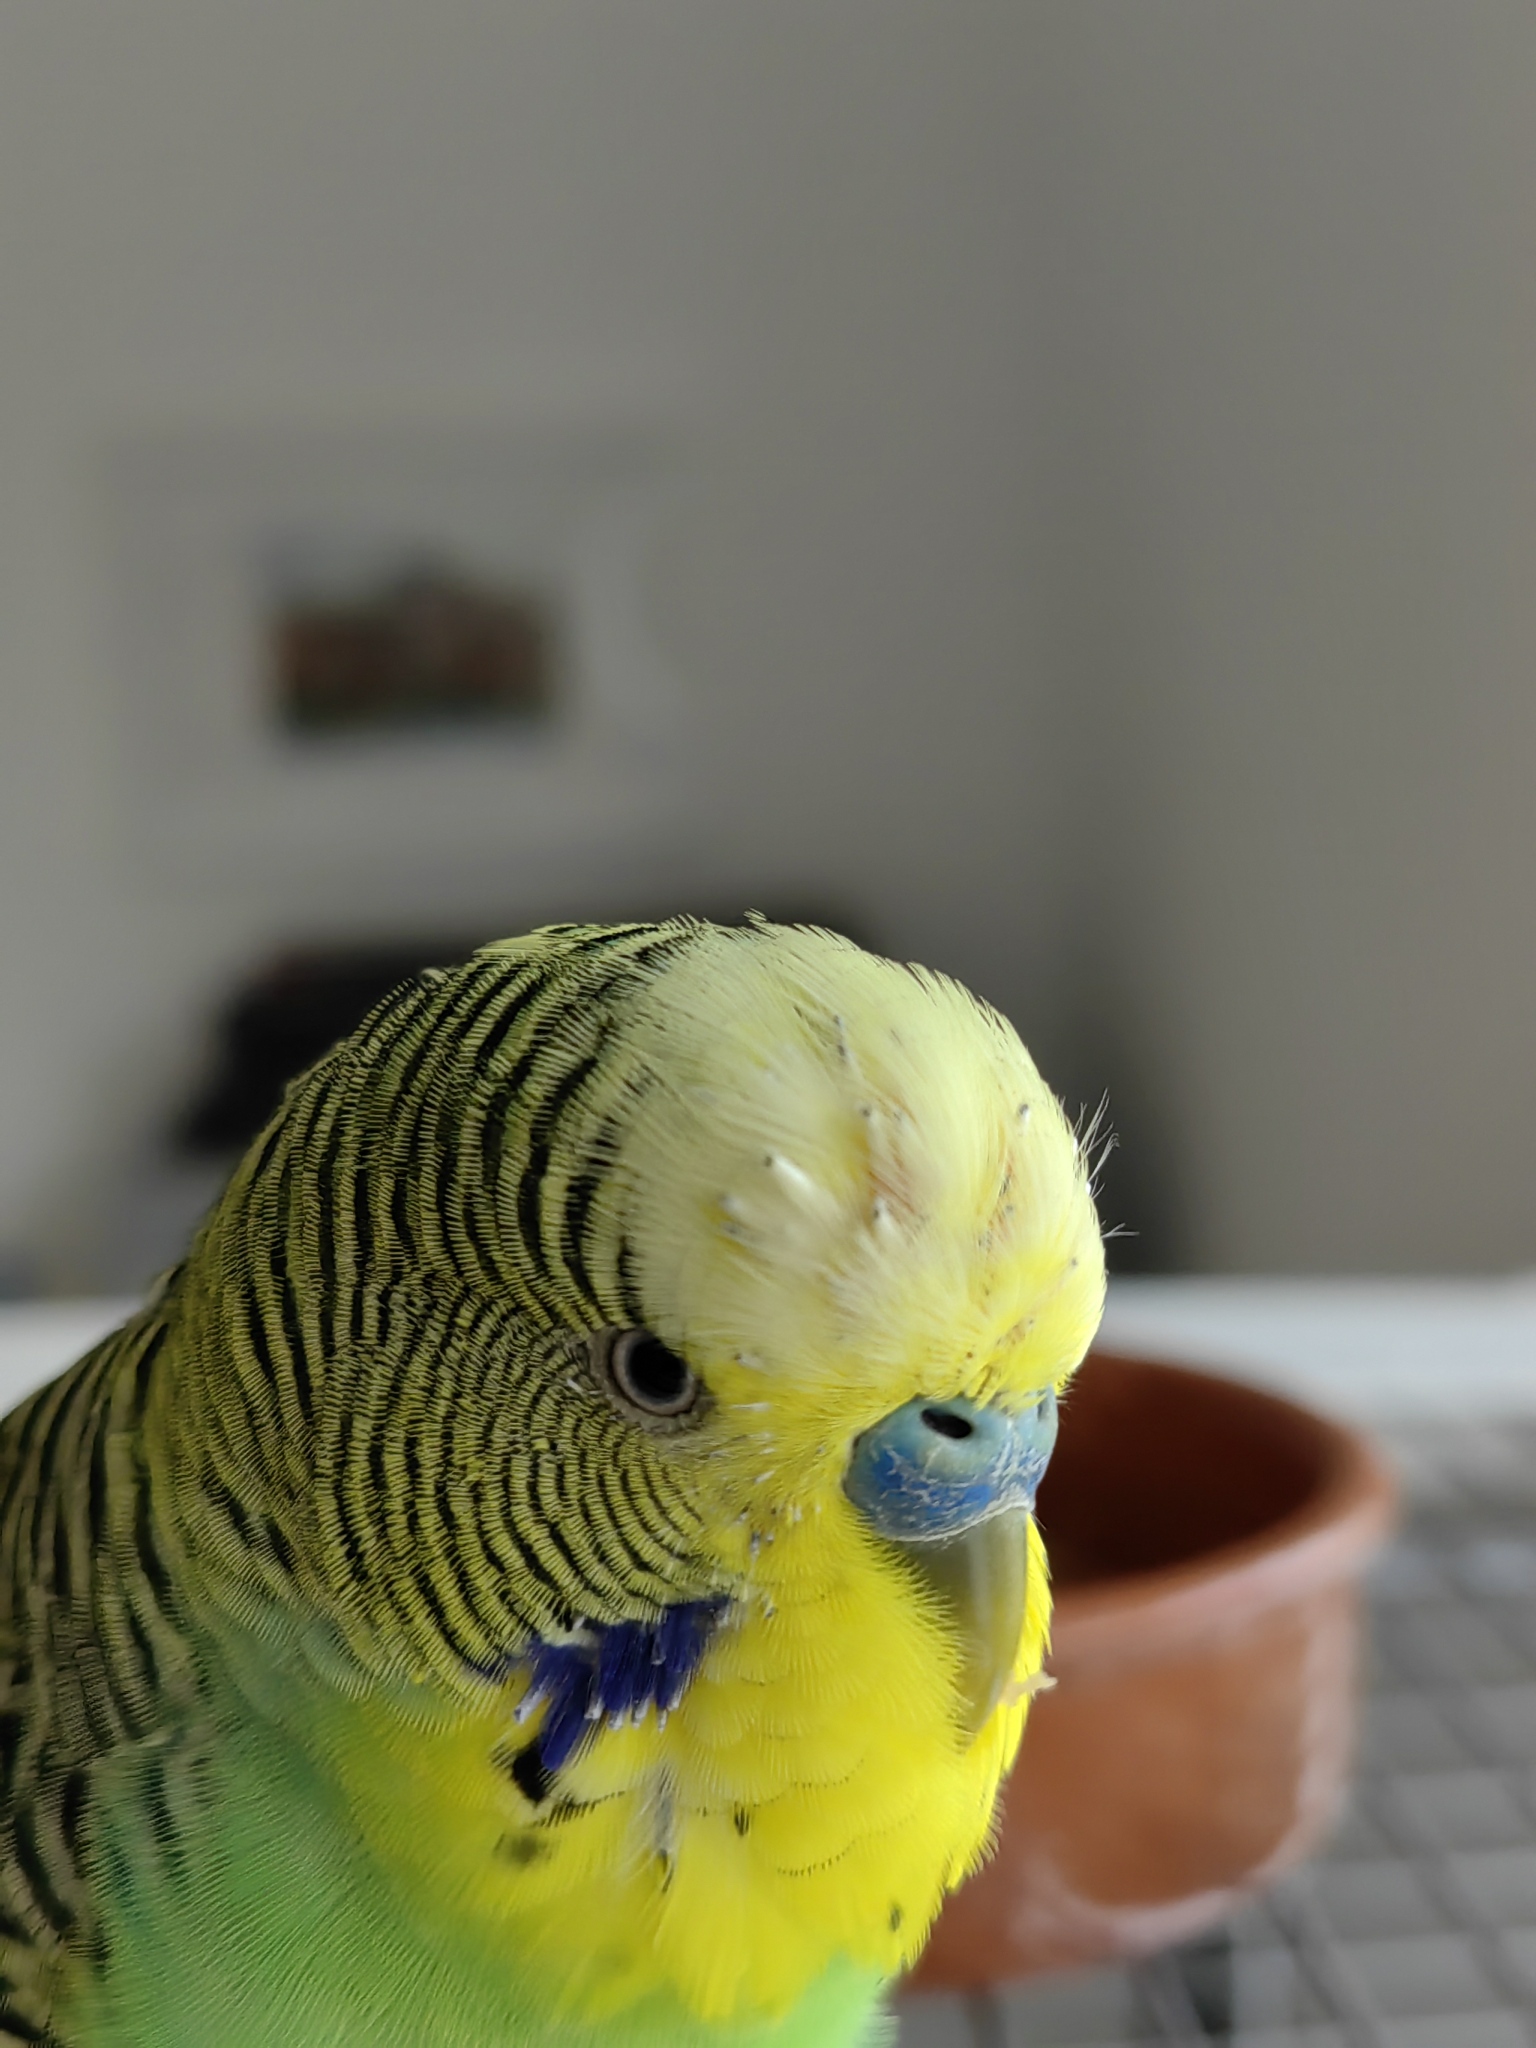 Why do budgies molt? The importance of molting for budgerigars' health and survival.